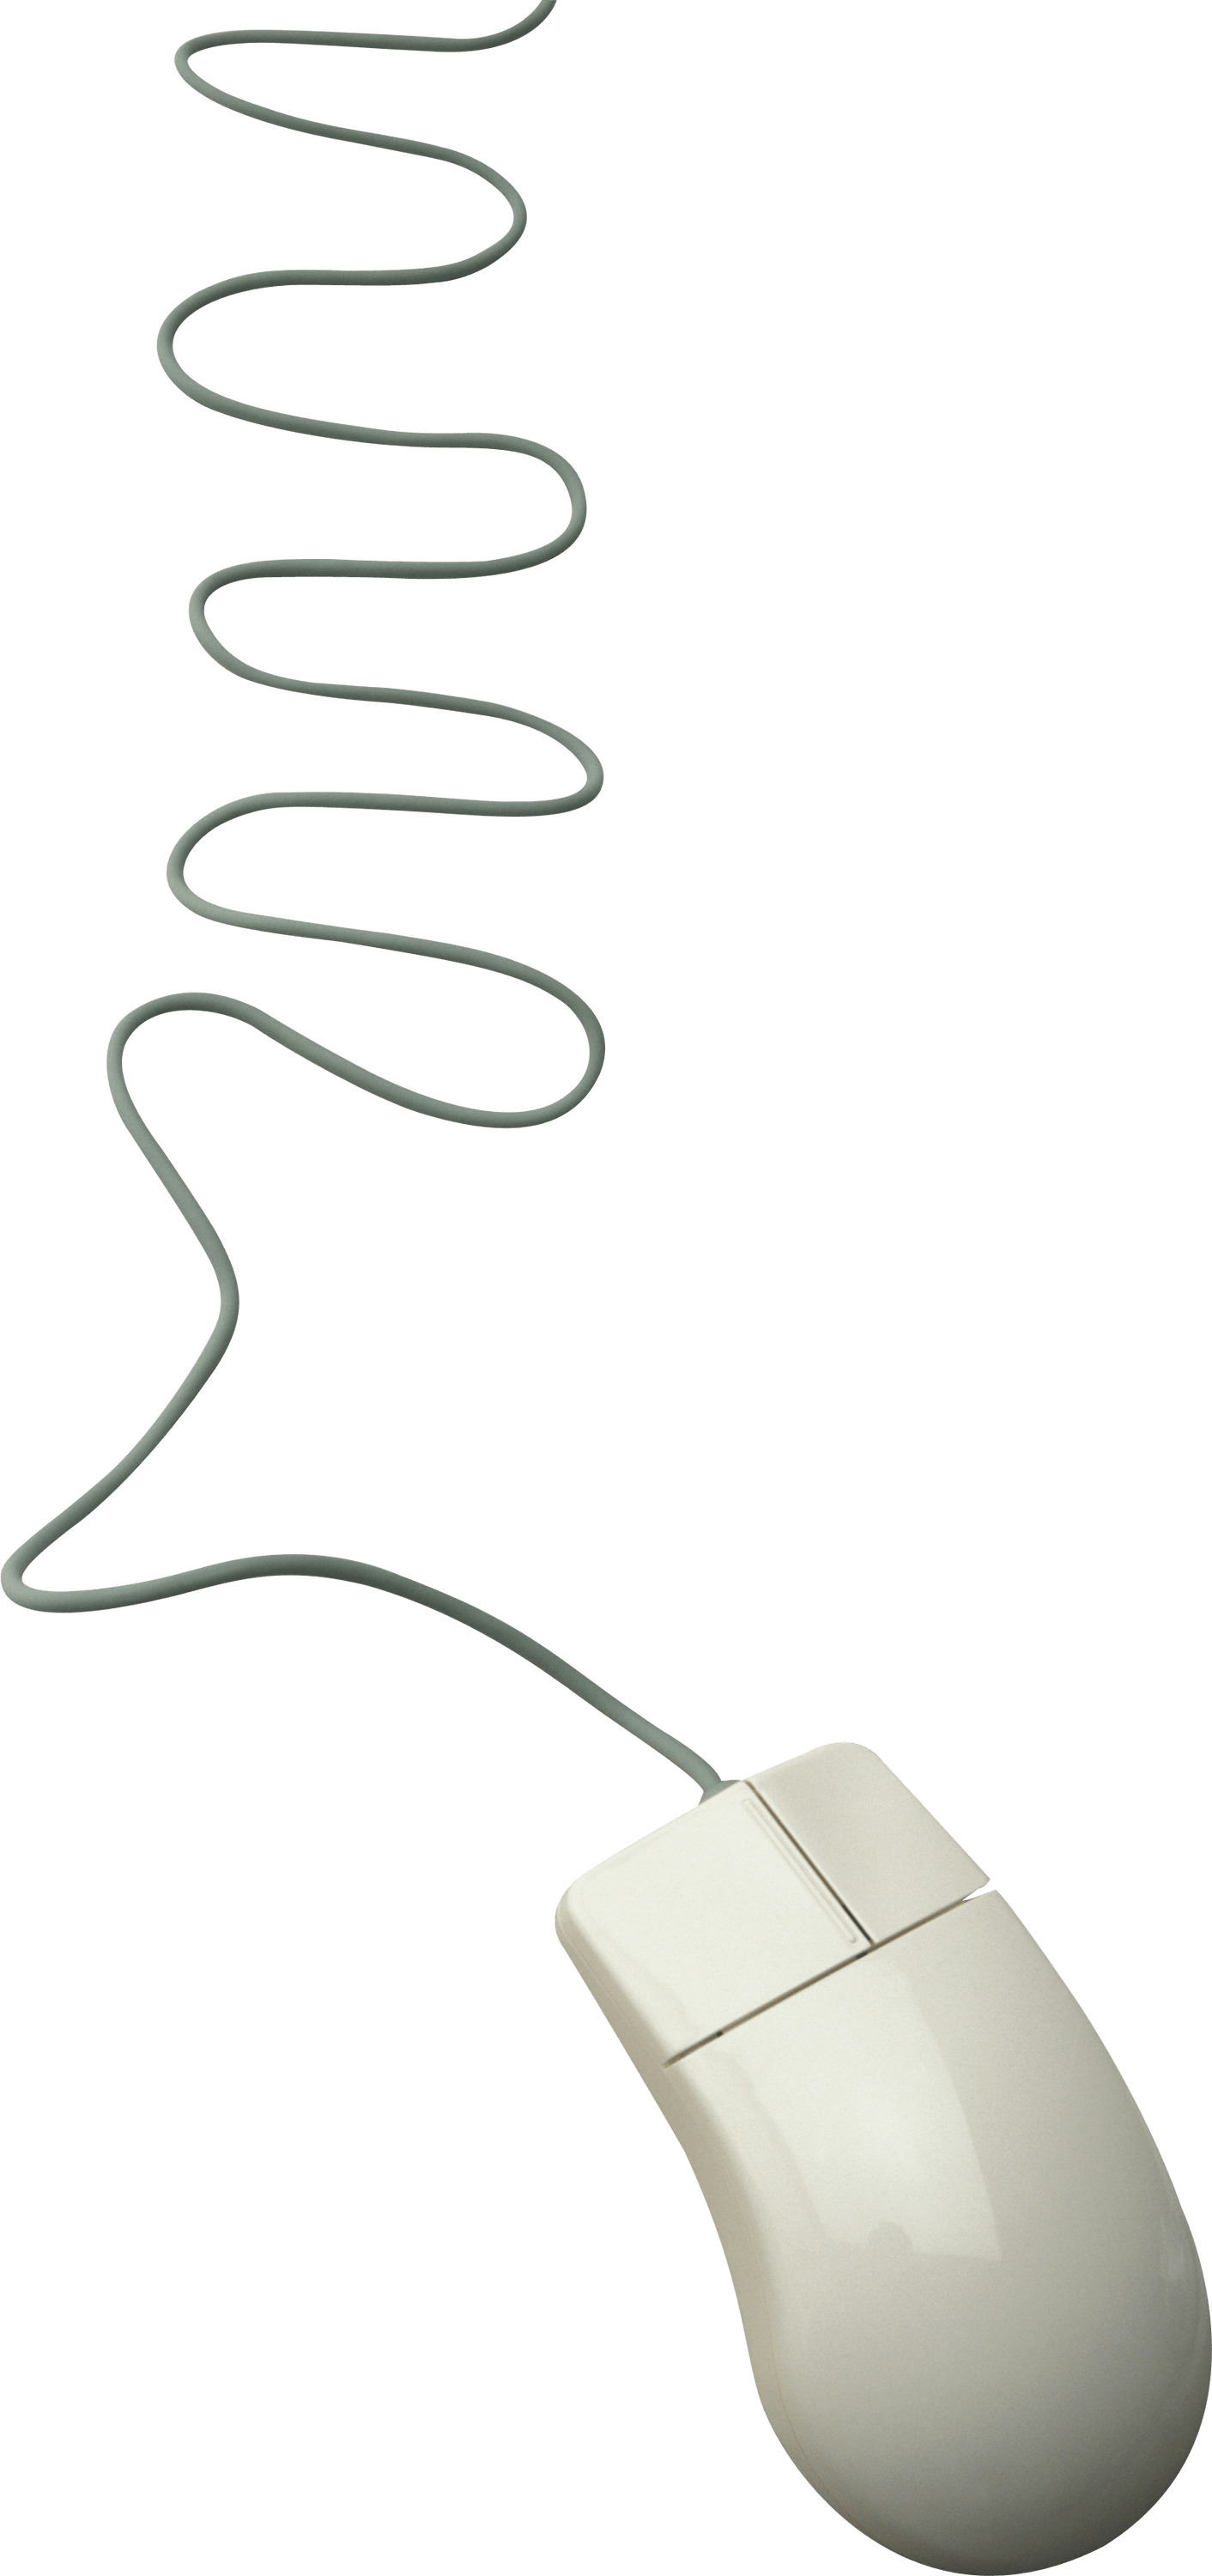 Computer Mouse Long Cord icons